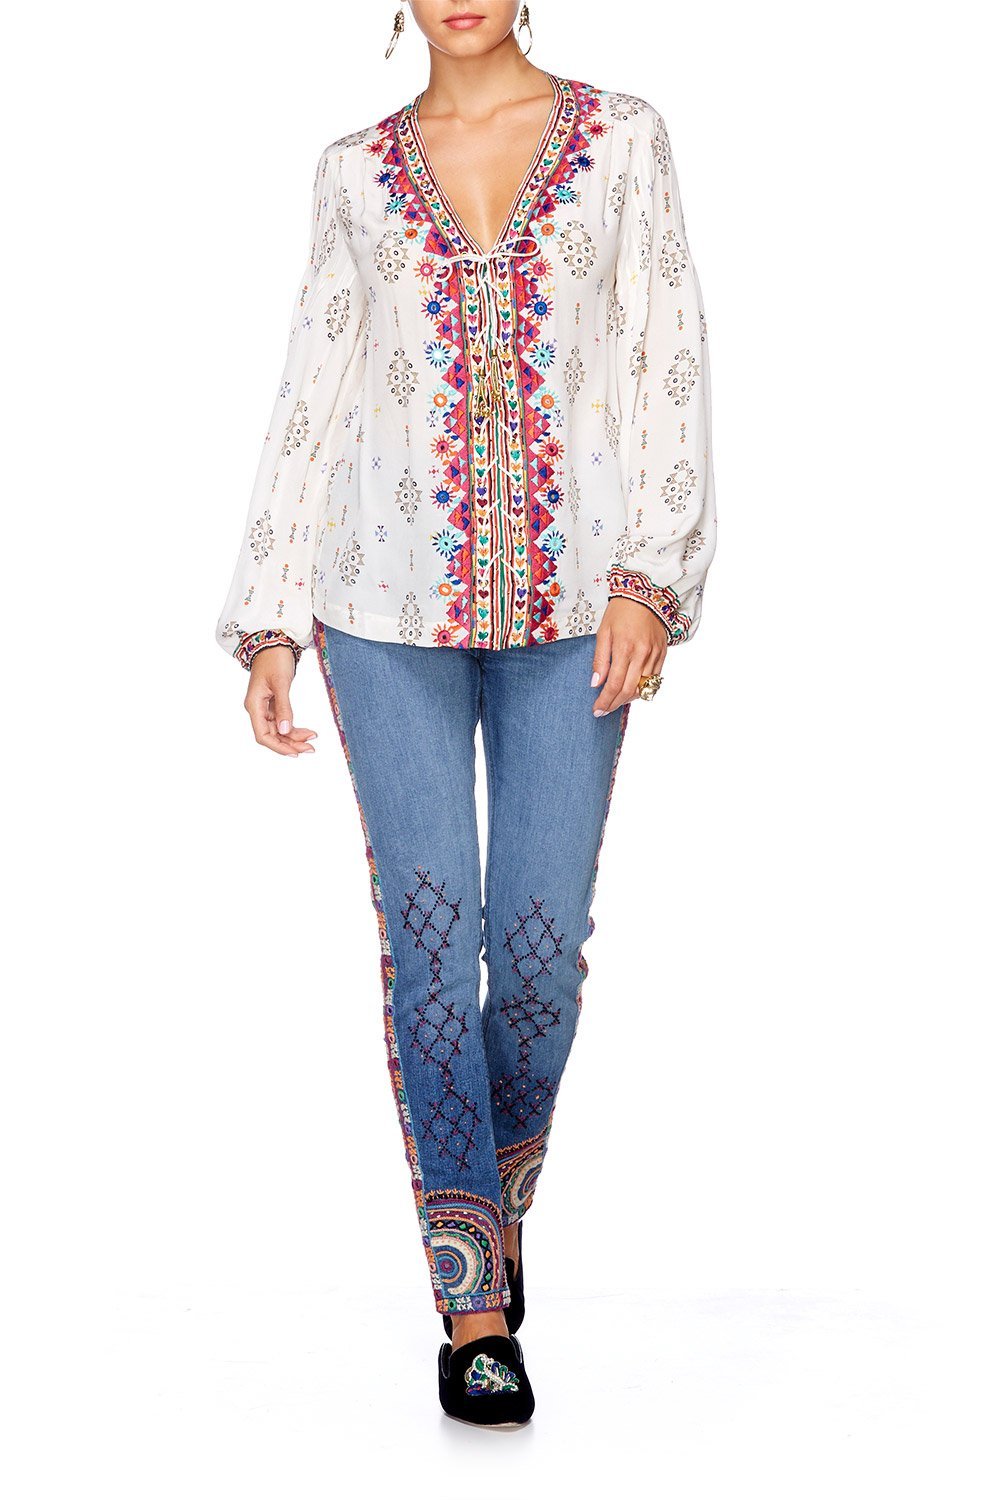 LOVE SONG PEASANT BLOUSE W FRONT LACING